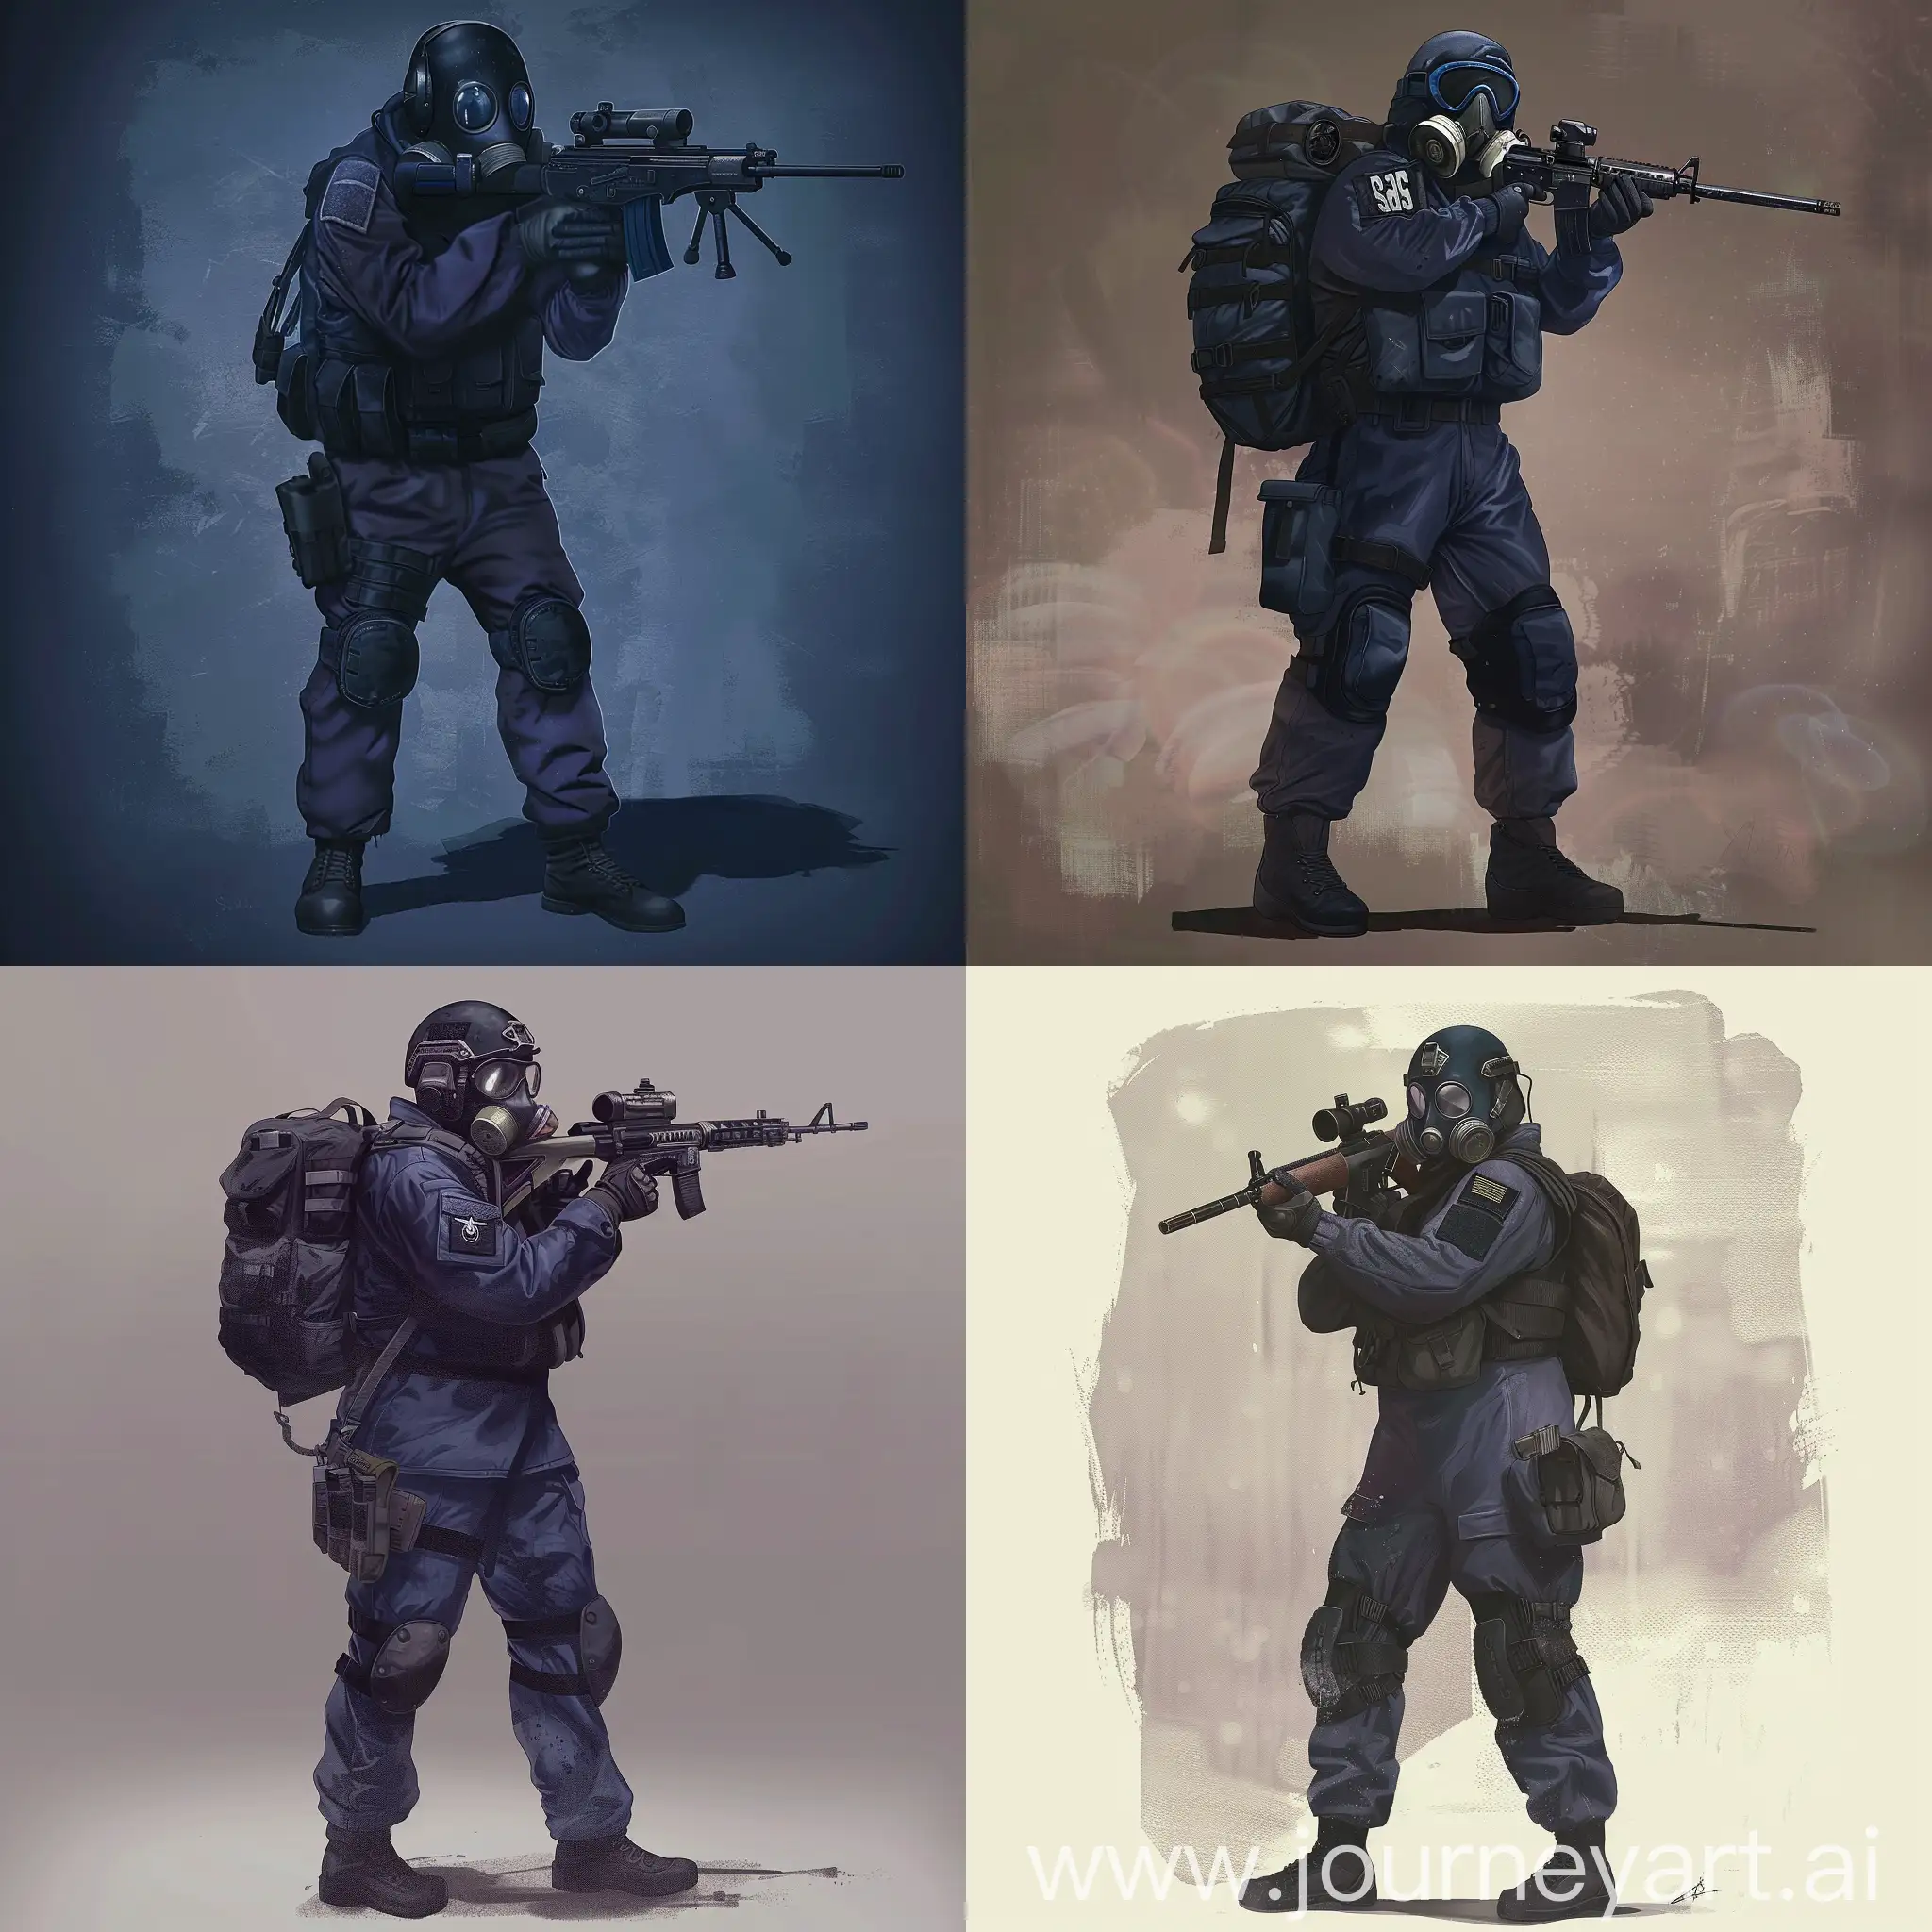 Concept character art, 1978 year SAS operator, dark purple military jumpsuit, hazmat protective gasmask on his face, small military backpack, military unloading on his body, sniper rifle in his hands. 